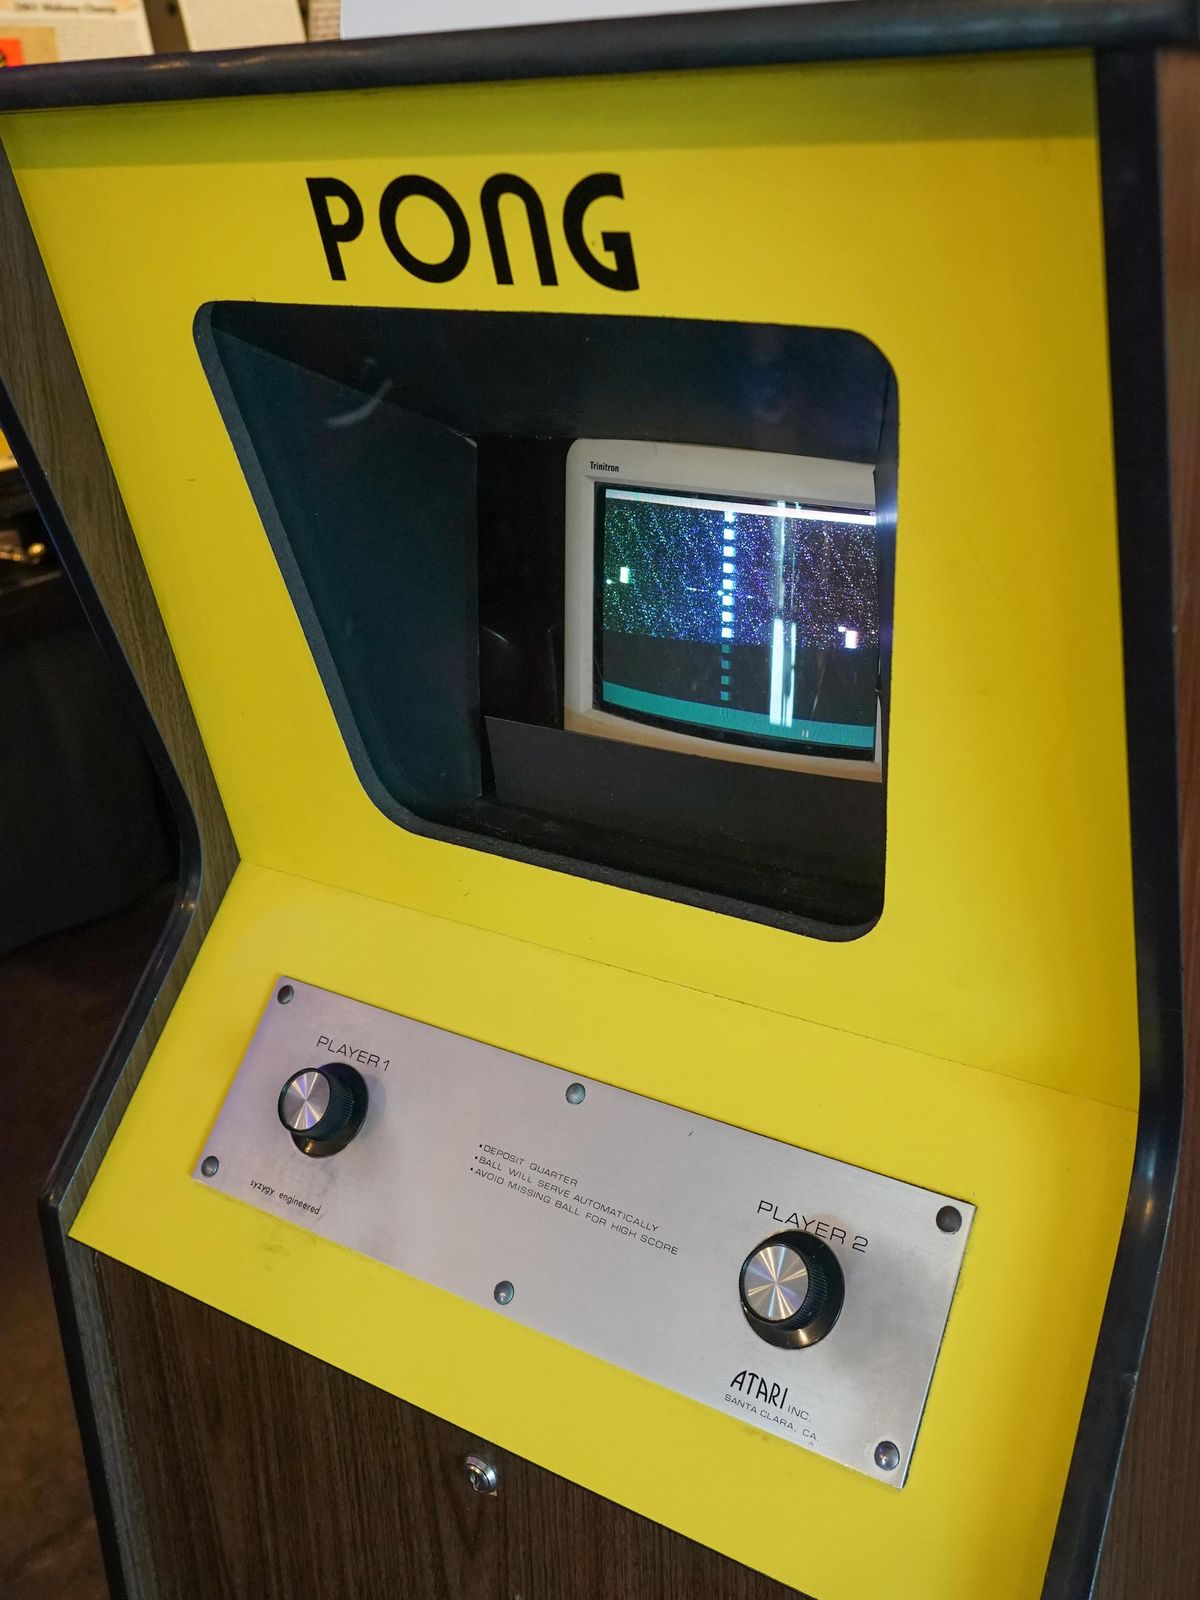 Pong arcade game in yellow cabinet containing black and white TV display, two knobs are labeled Player 1 and Player 2, Atari logo visible.